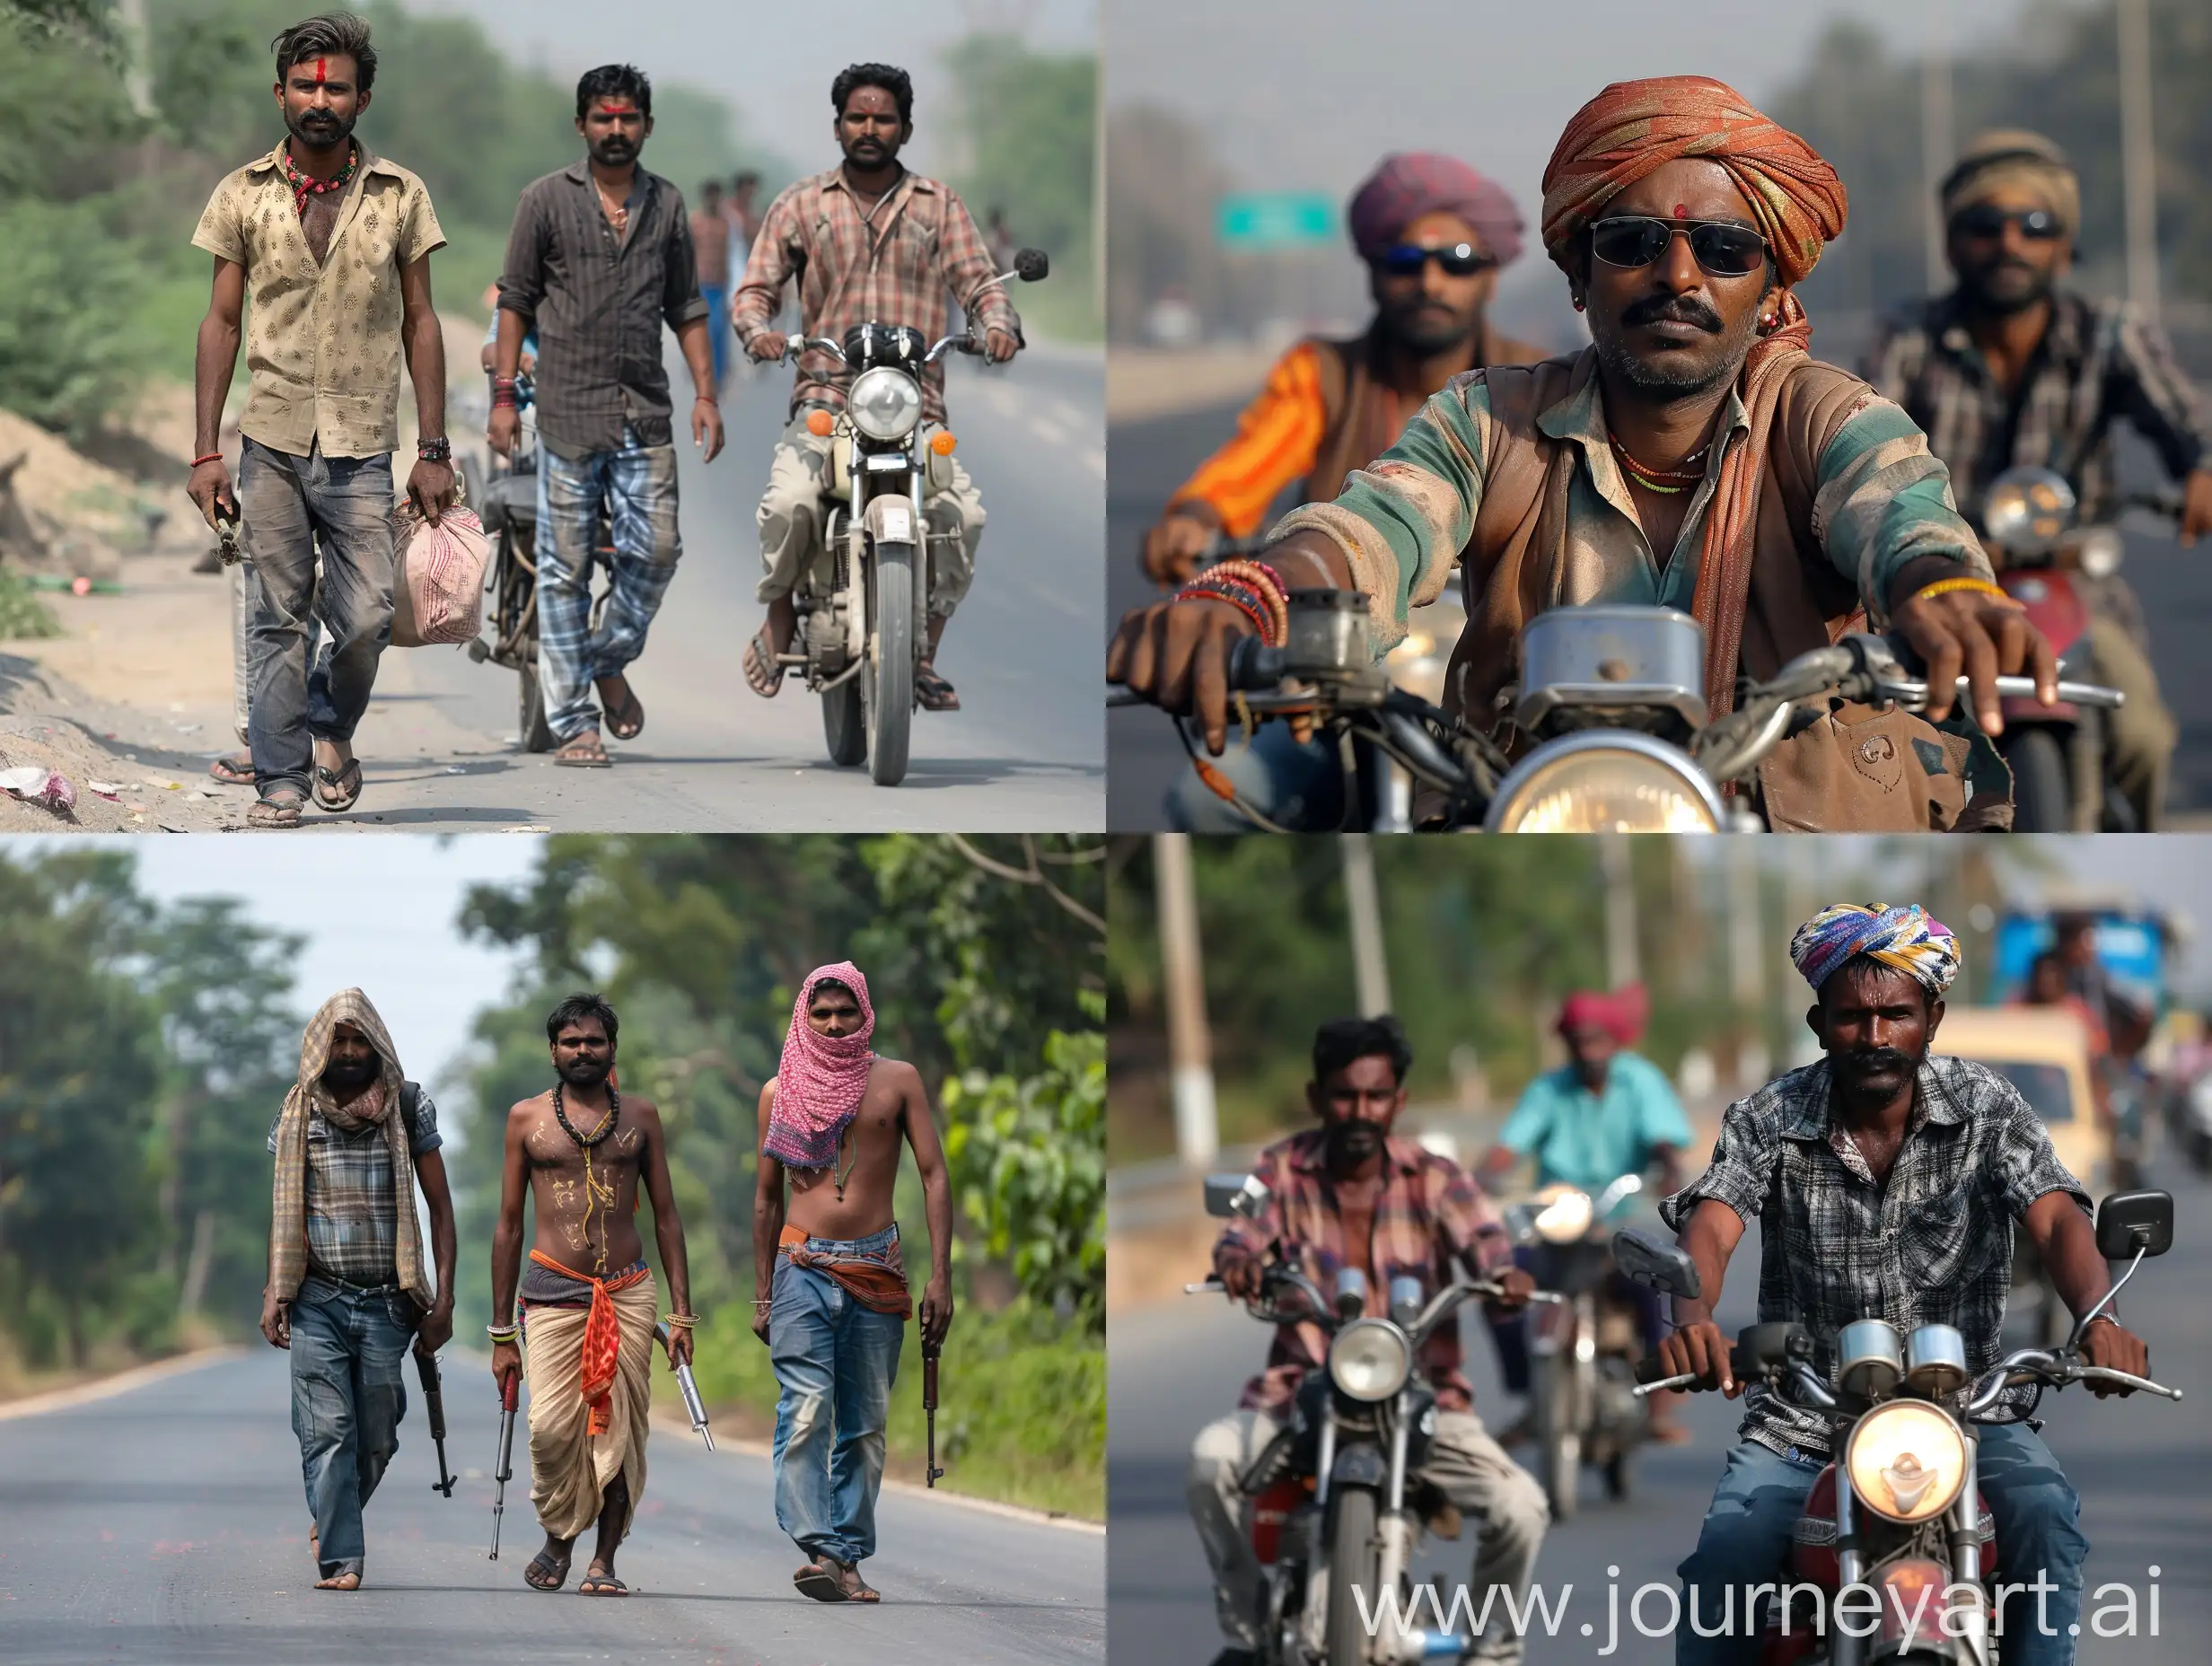 Vibrant-Indian-Rowdys-Gathered-on-Urban-Road